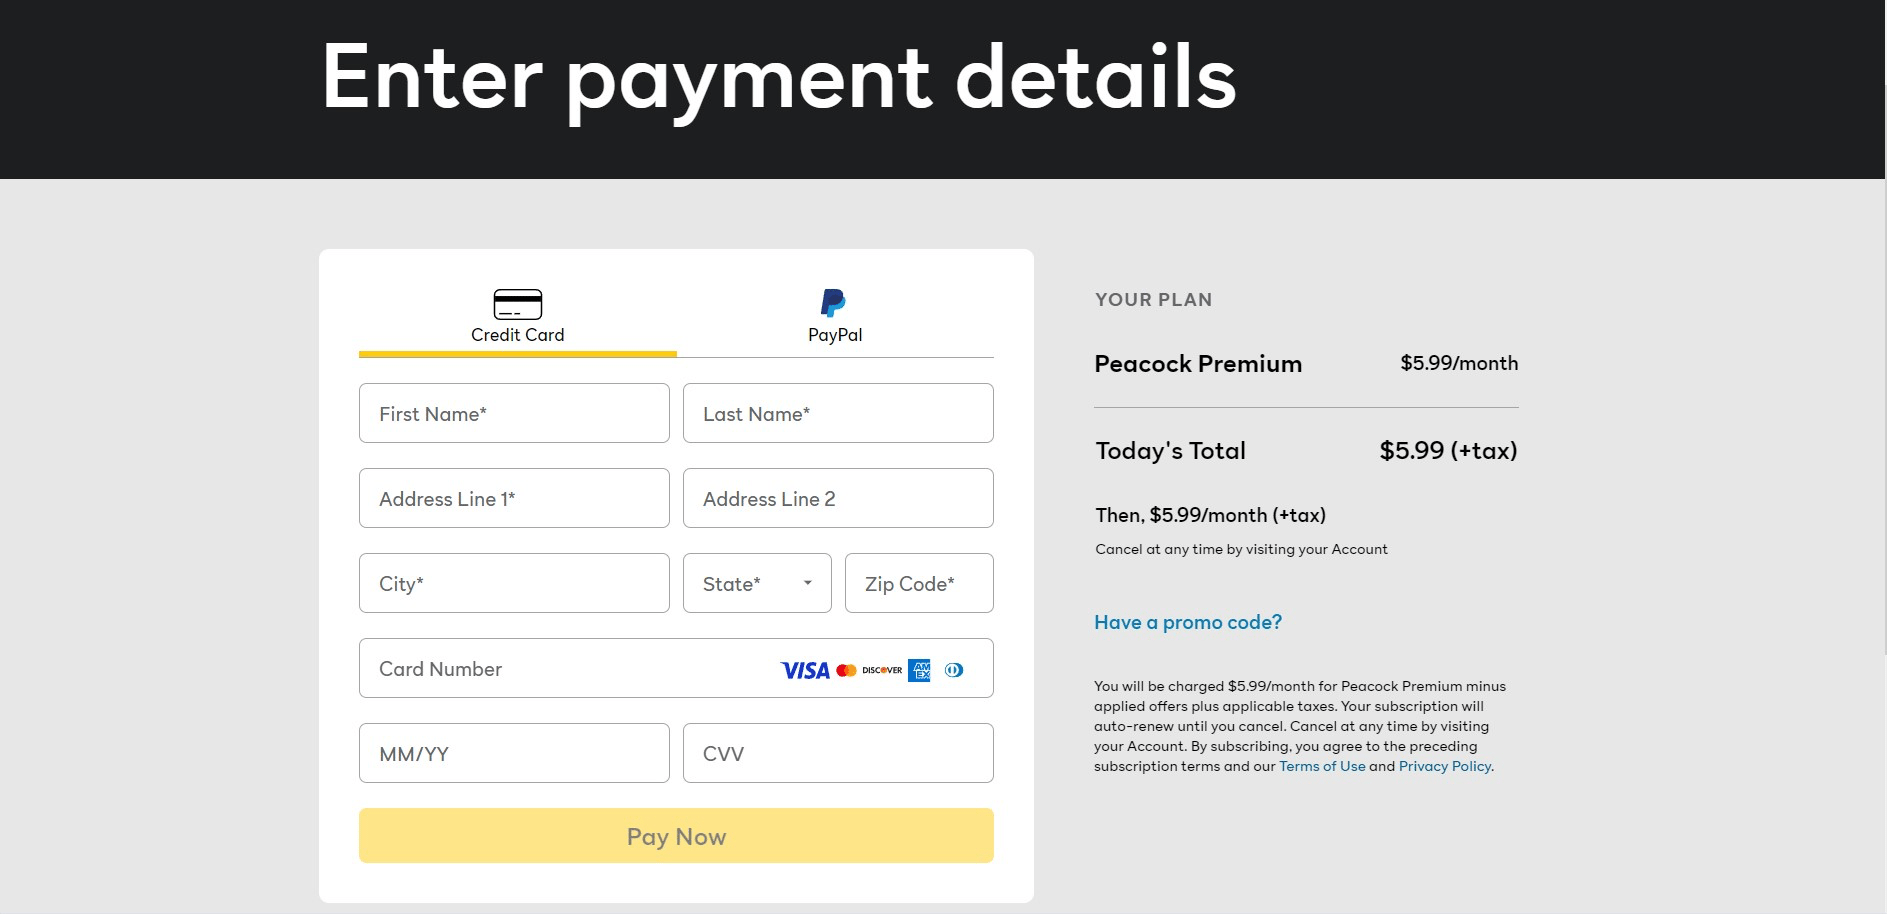 Entering payment details for a Peacock subscription